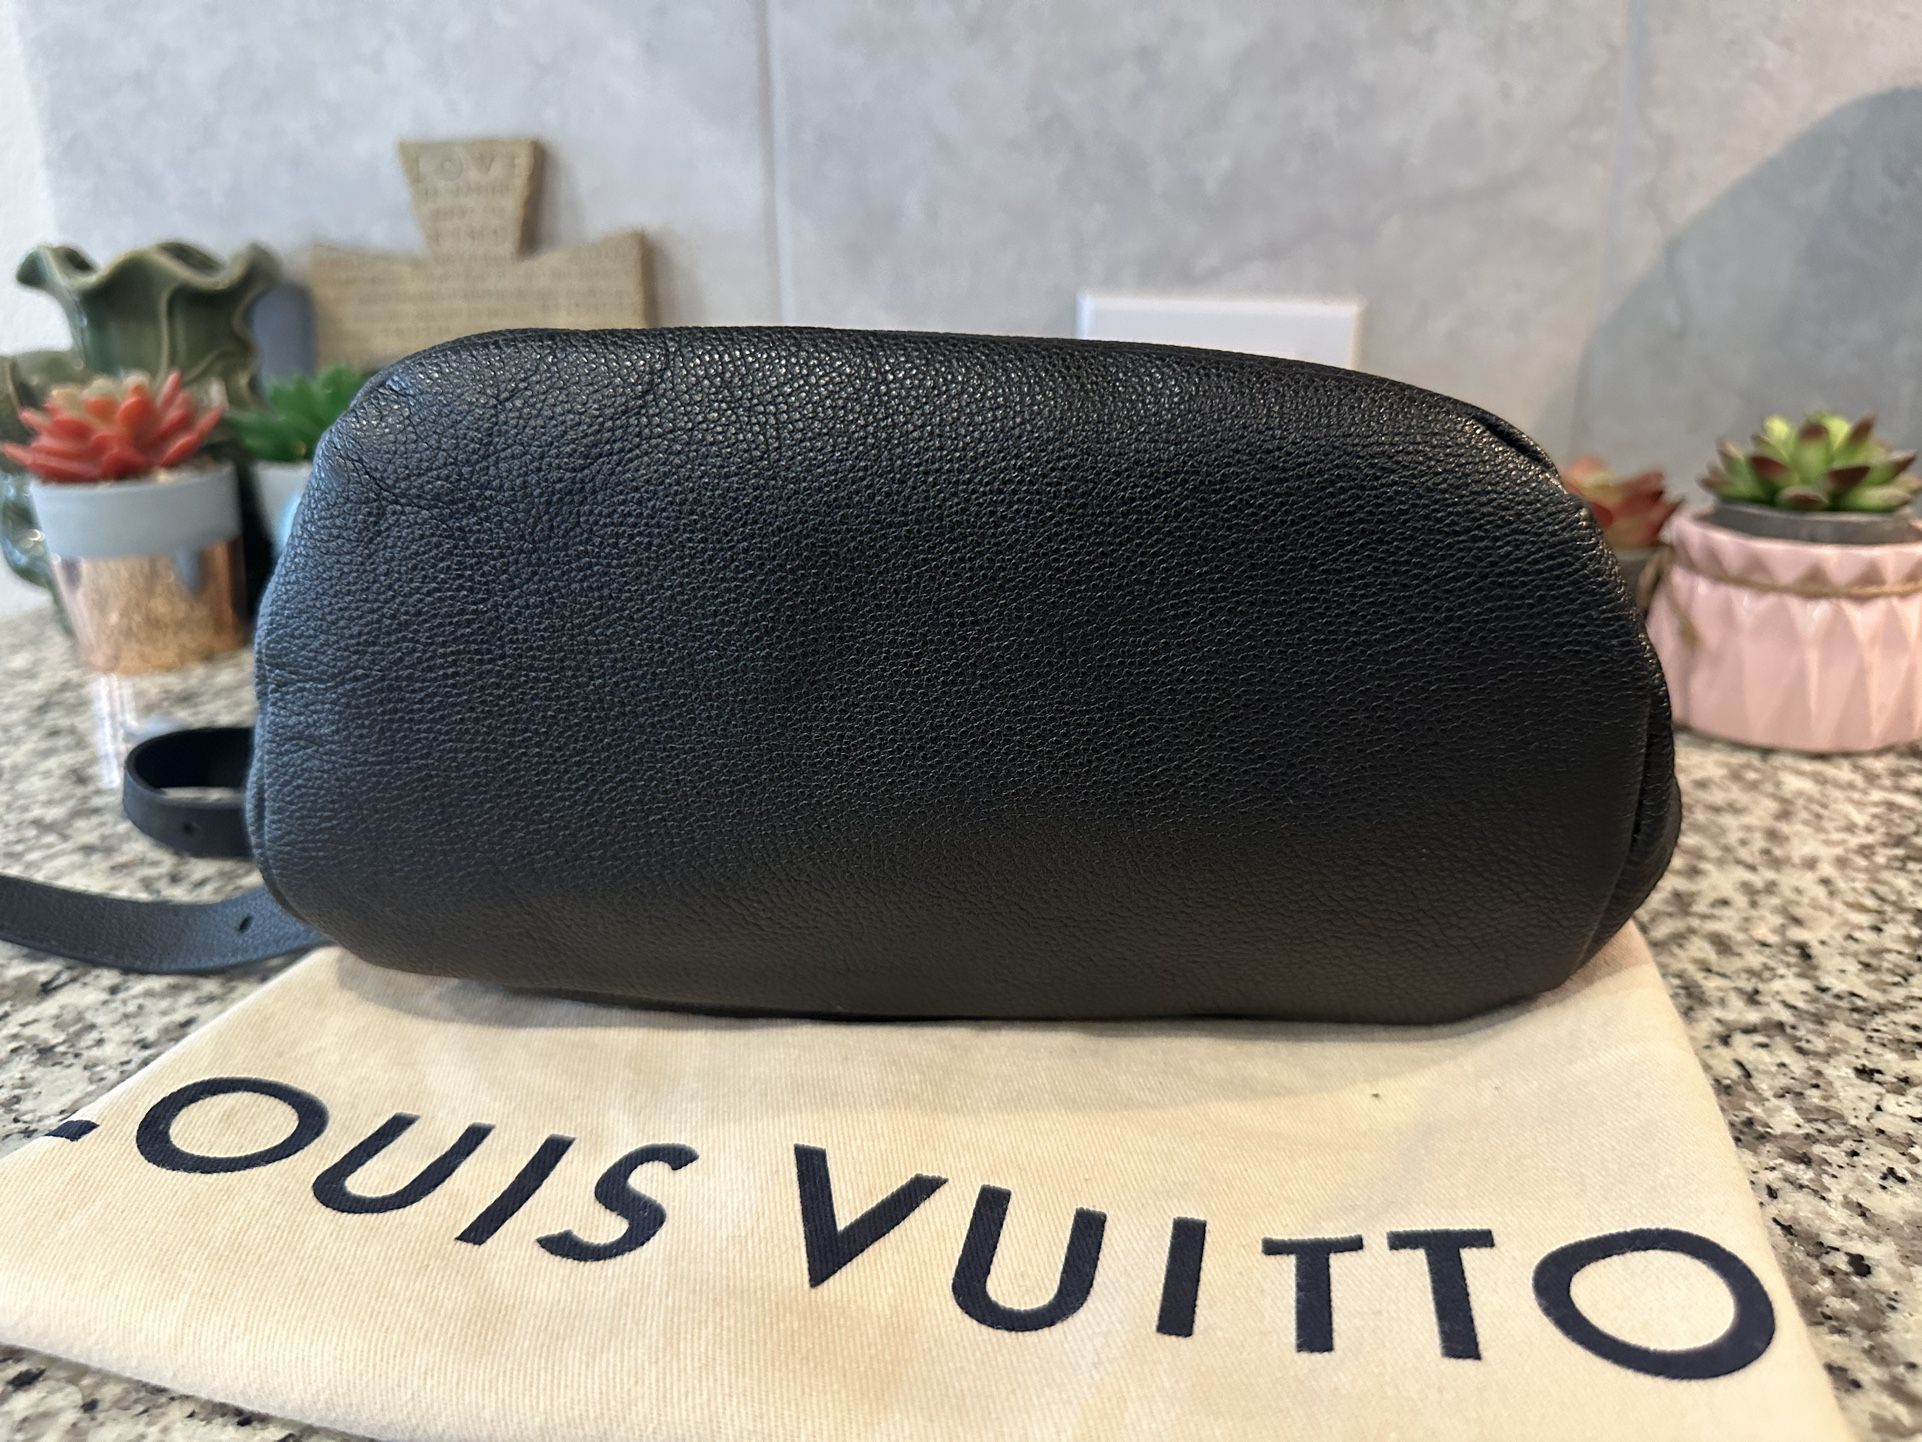 Louis Vuitton Sorbonne Backpack for Sale in Austin, TX - OfferUp